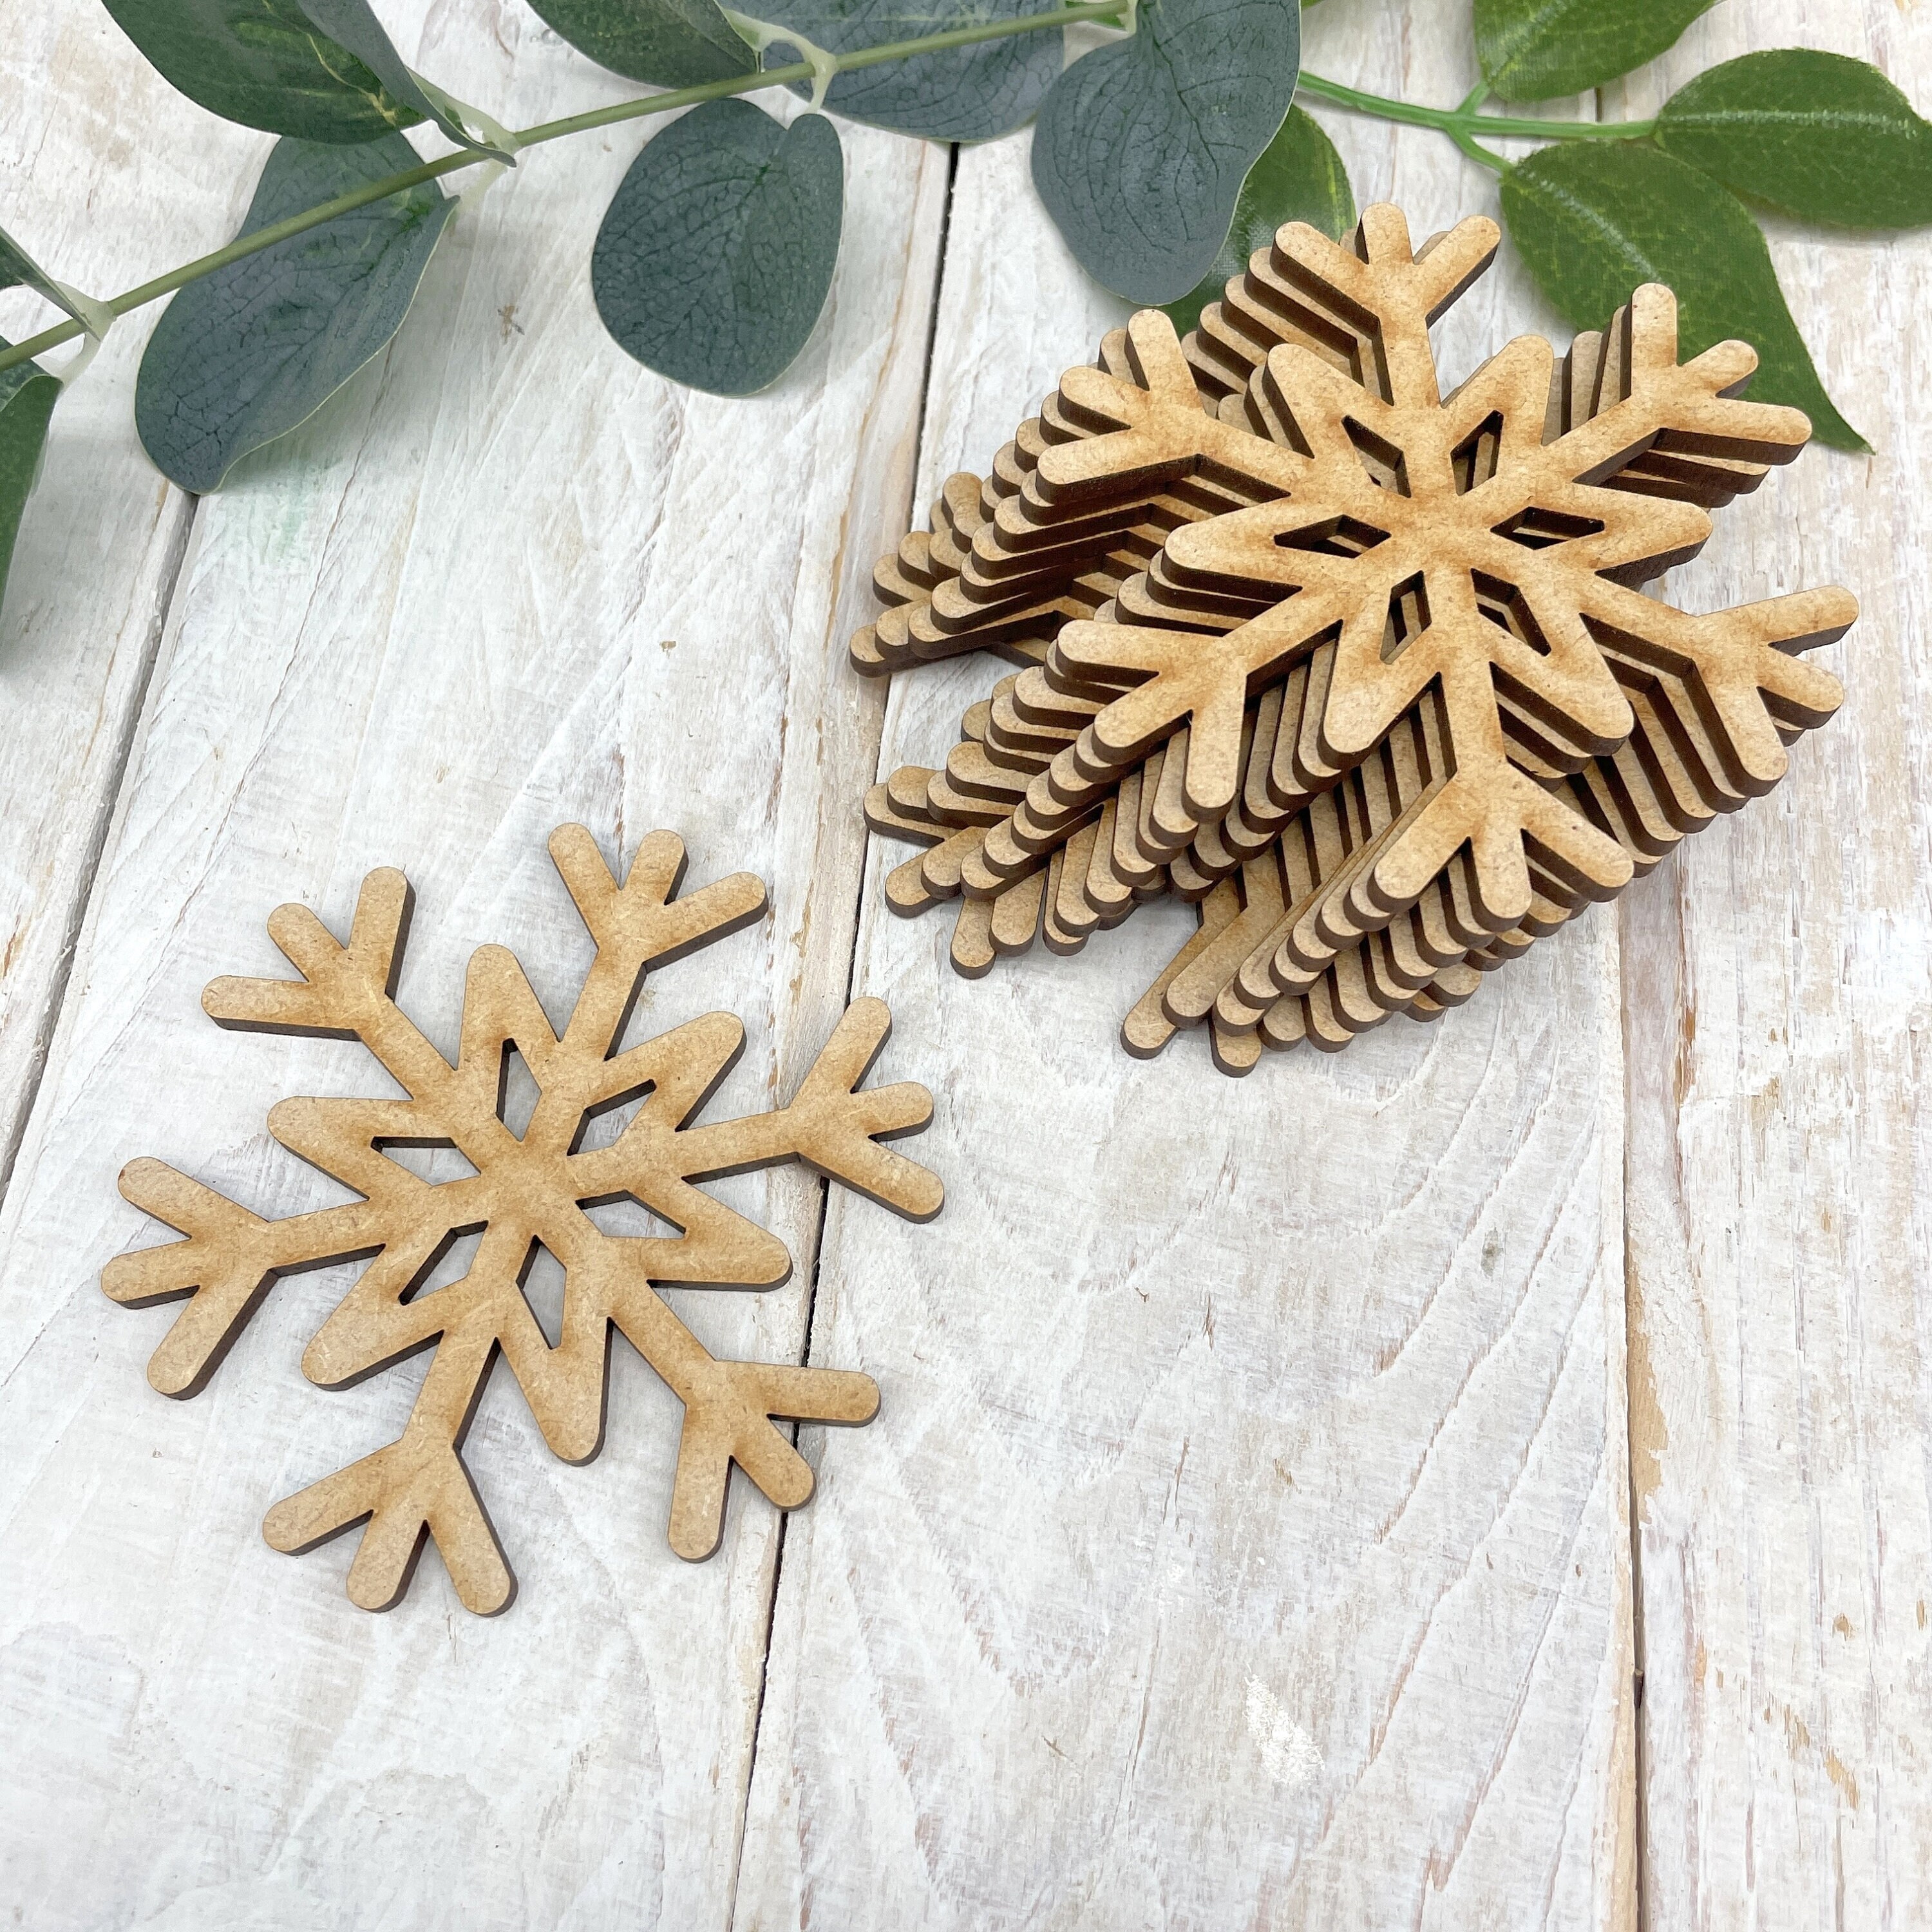 Wooden Snowflakes Set of 12 MDF Christmas Crafts Ornaments Blank Shapes  Festive Home Decoration